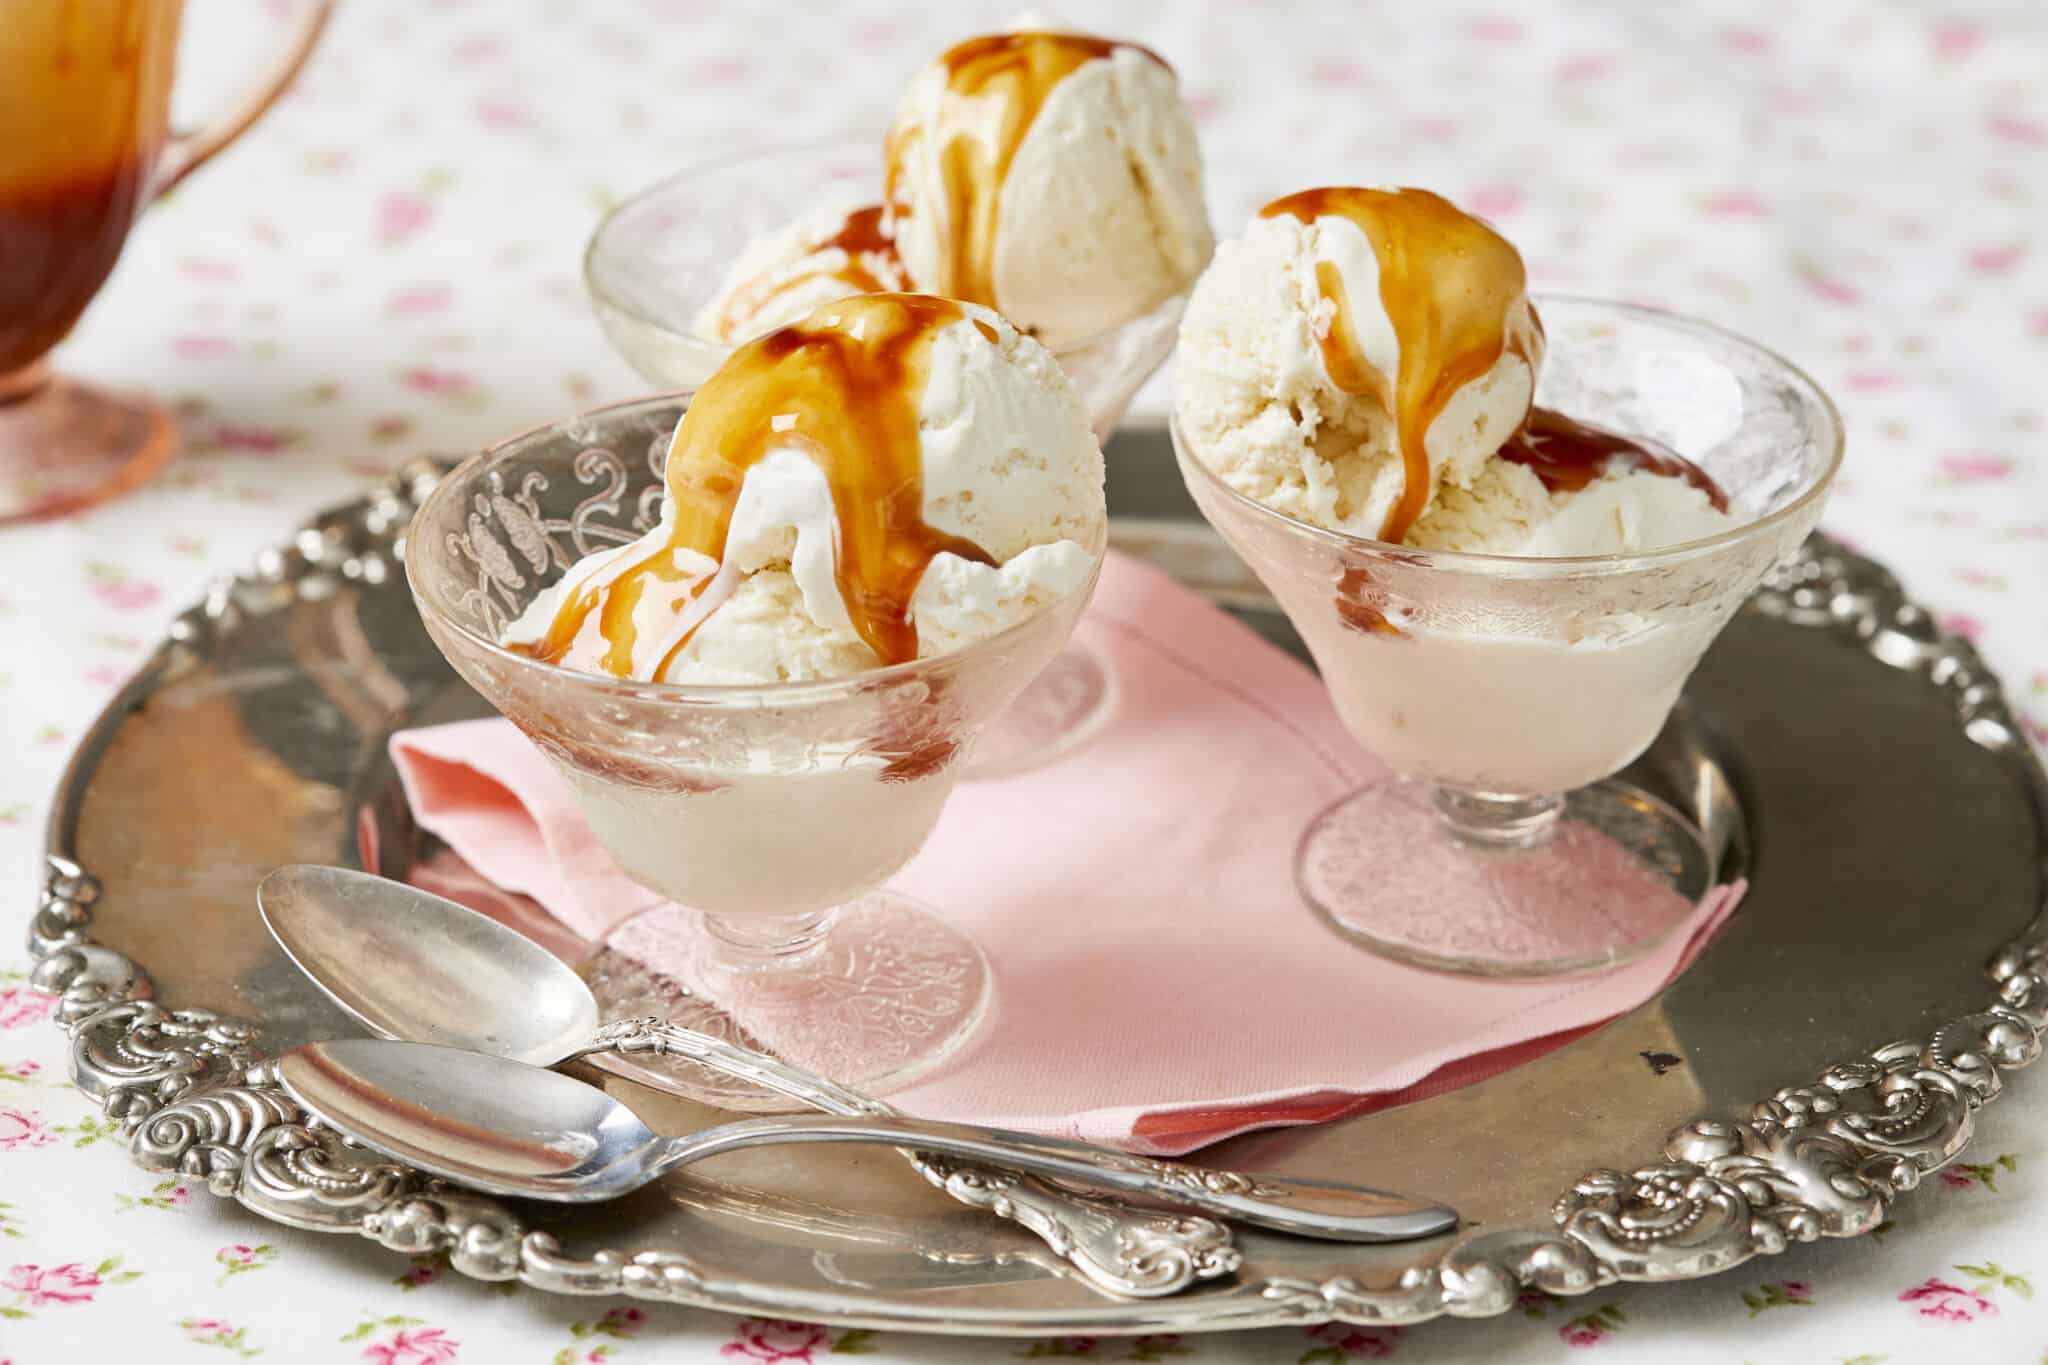 The velvety Irish Cream Ice Cream is served in 3 small glass dessert bowls on a pale pink napkin on a silver plater with floral patterns, drizzled with glossy dark-amber Irish whiskey caramel sauce.